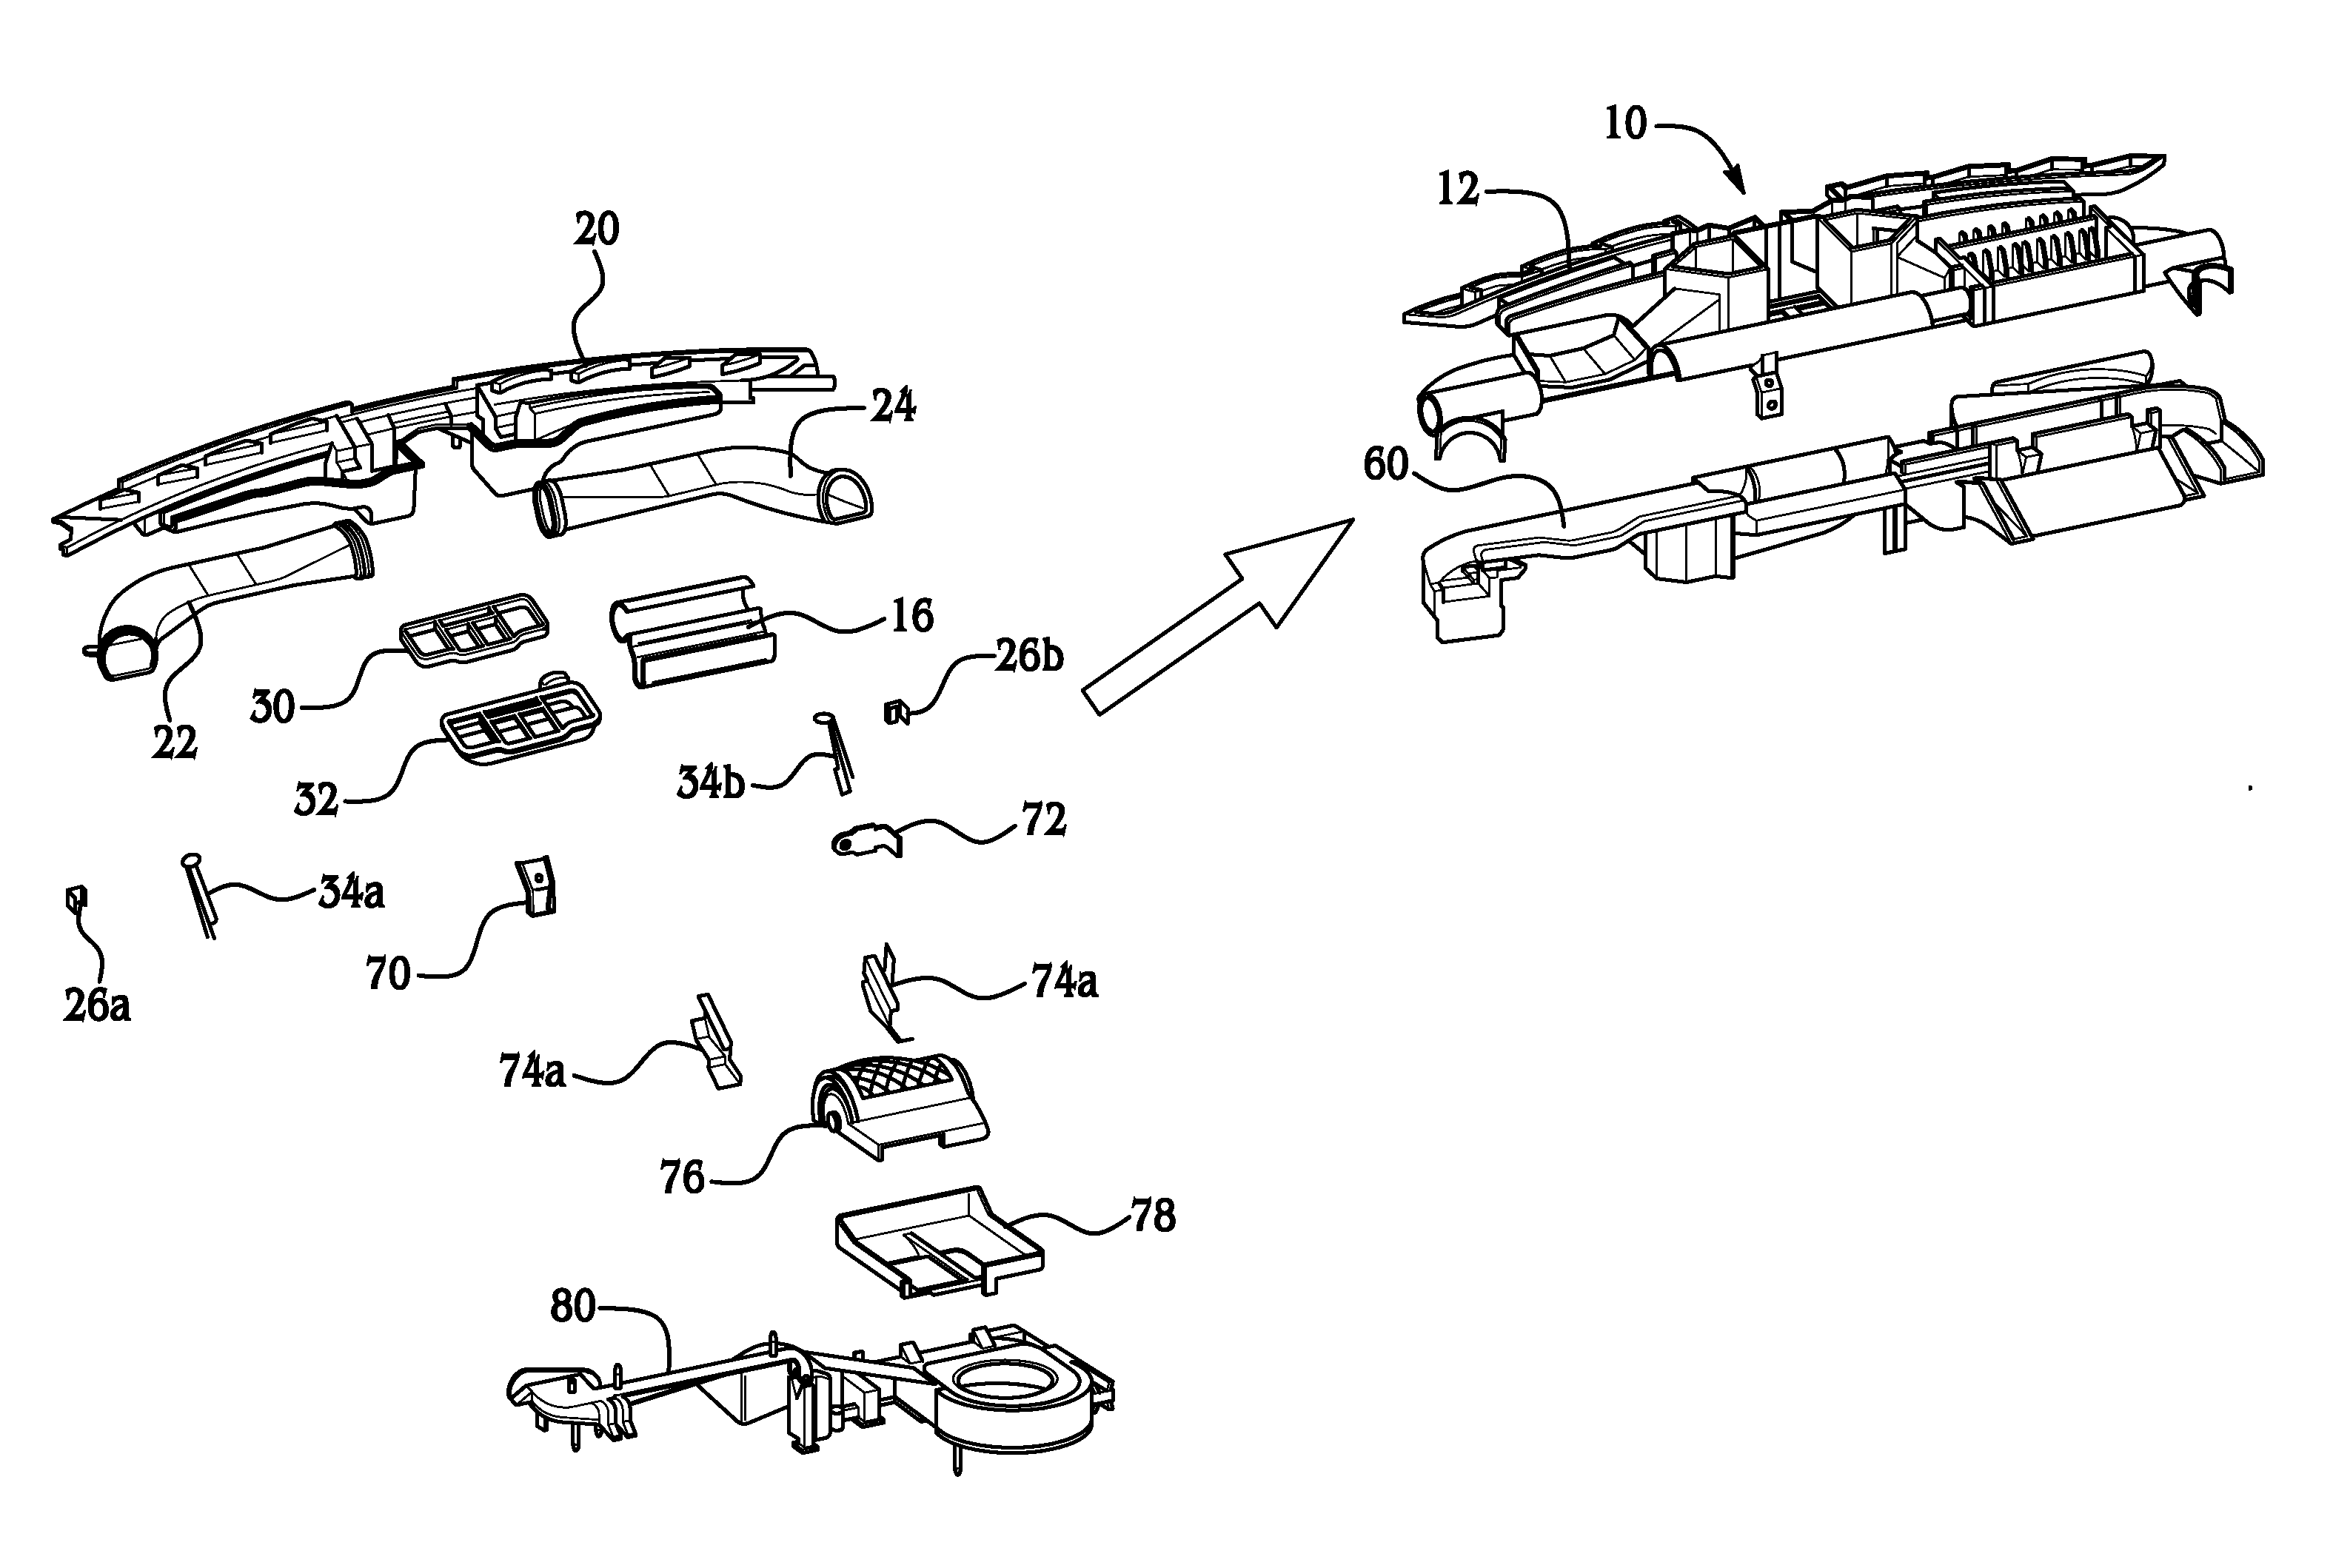 Integrated structural member for a vehicle and method of making